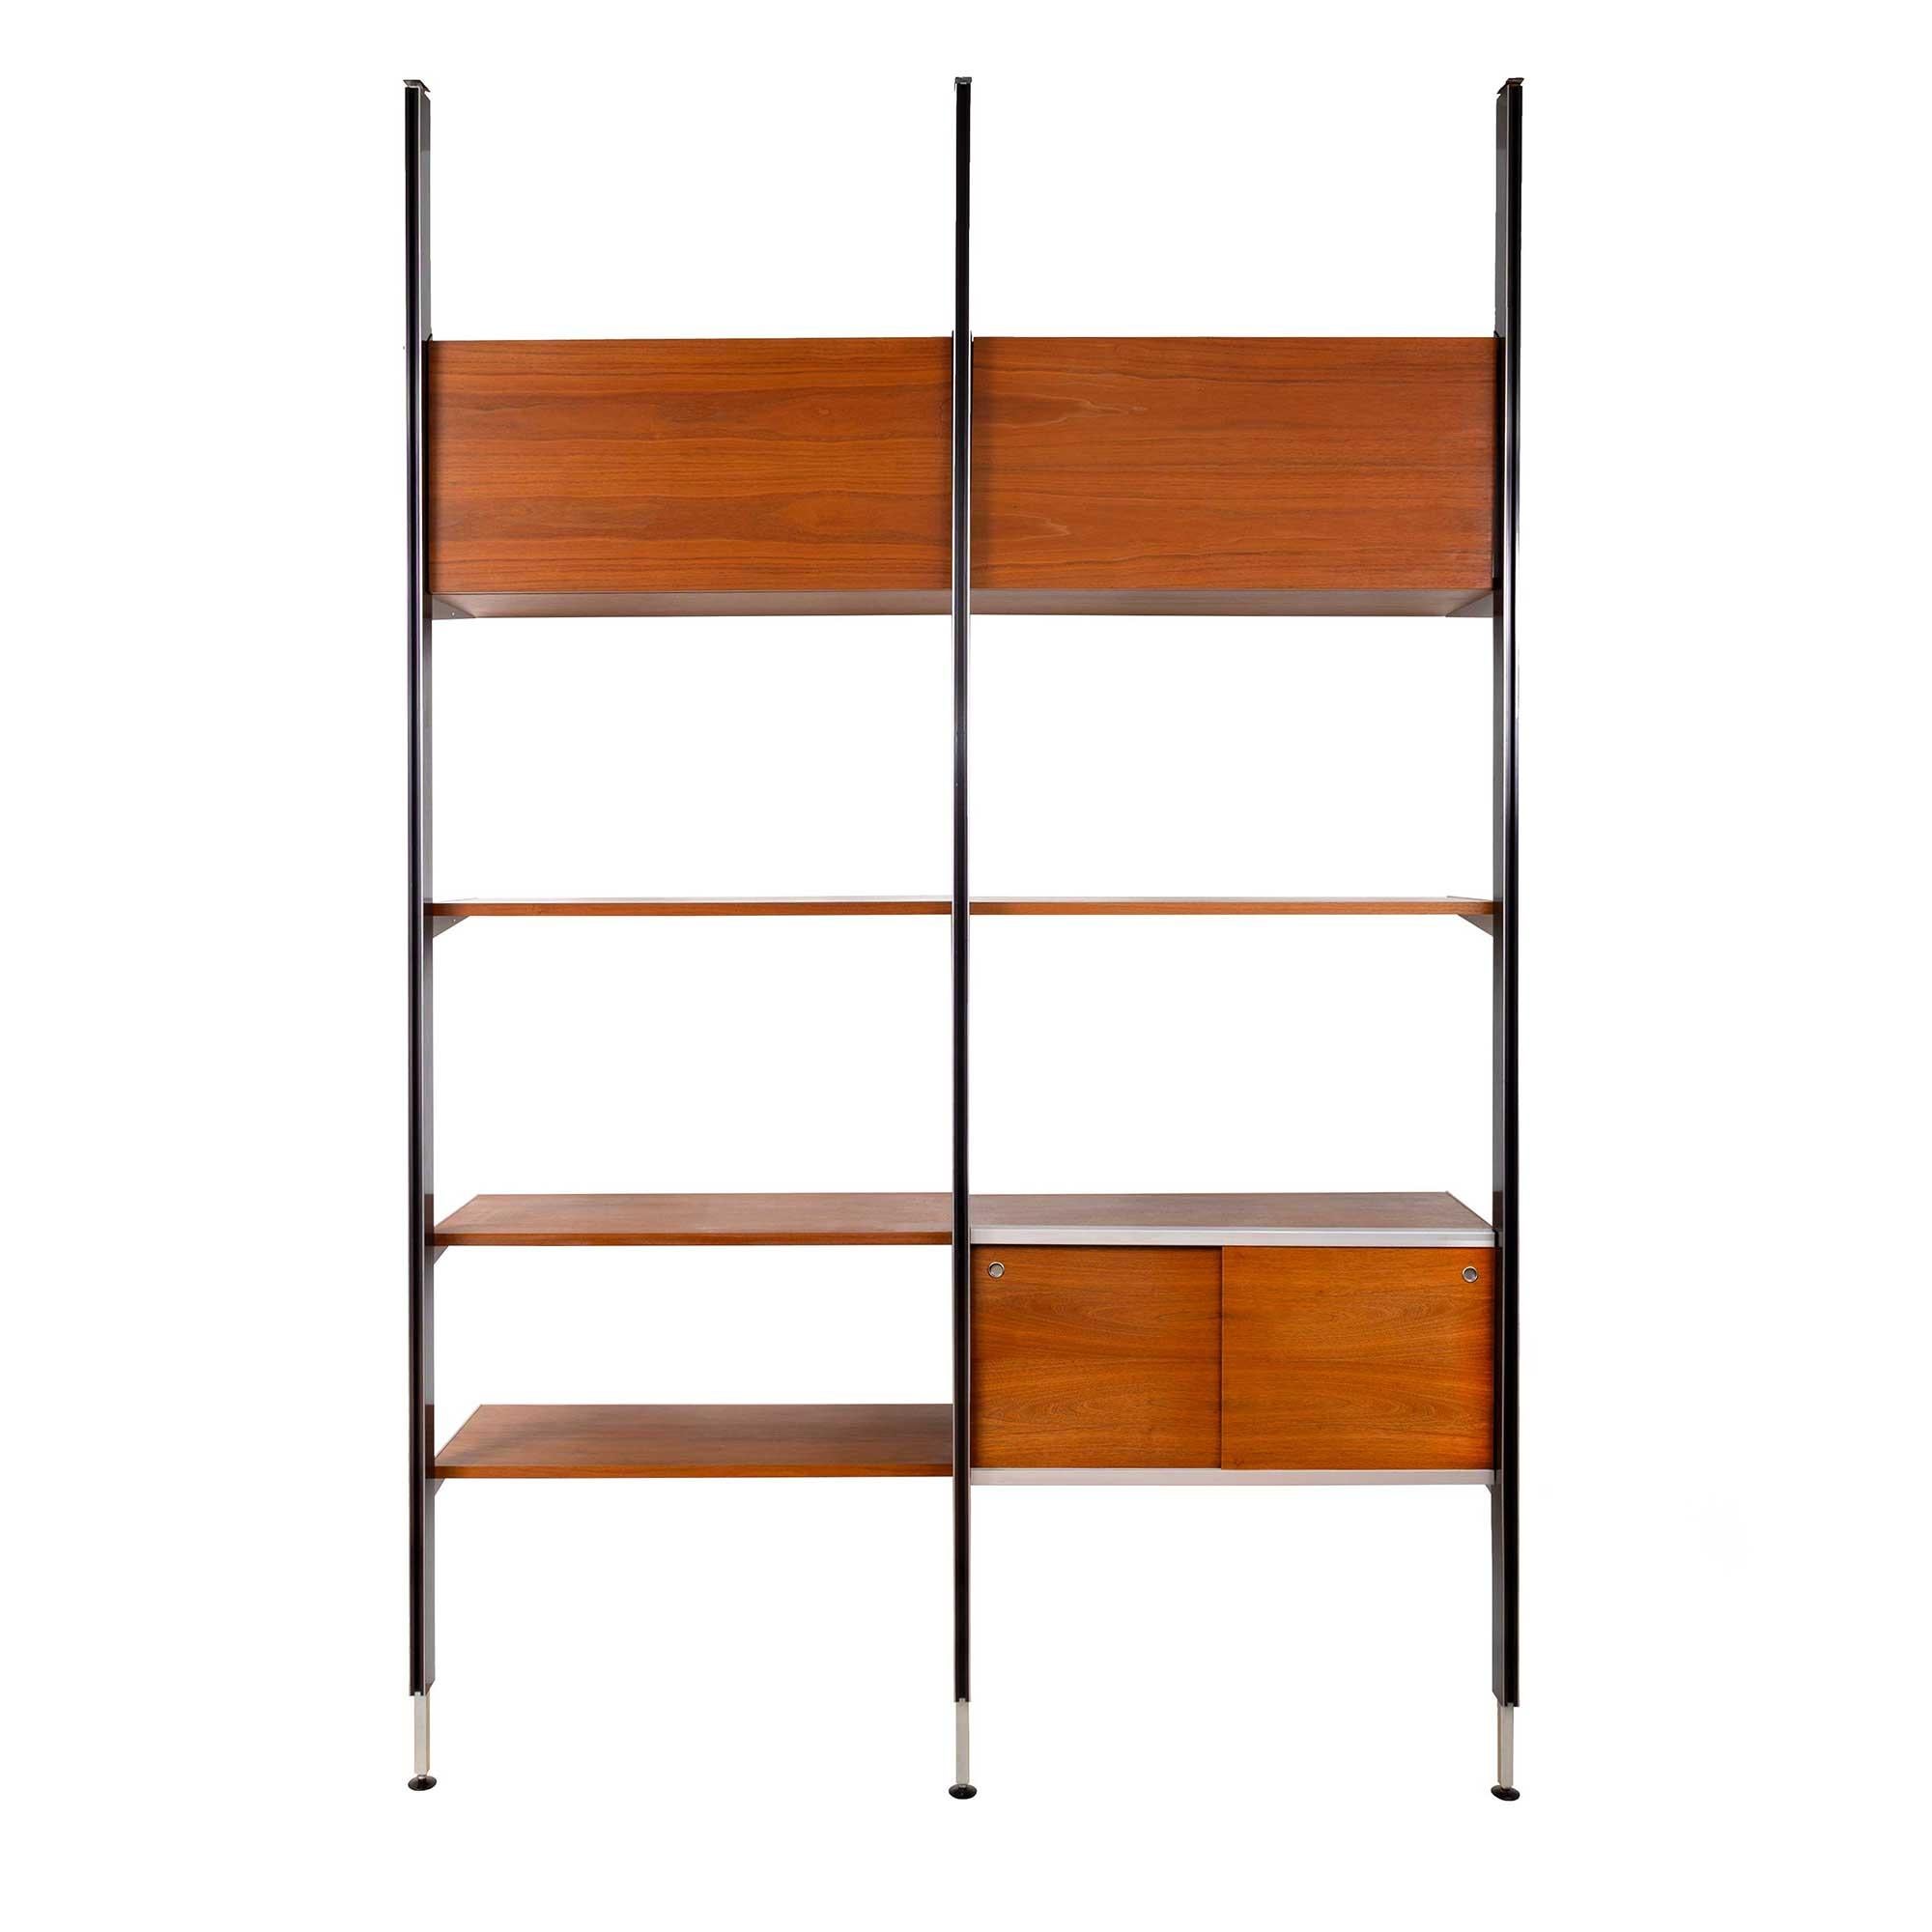 George Nelson CSS Book Shelve System Circa 1960s for Herman Miller